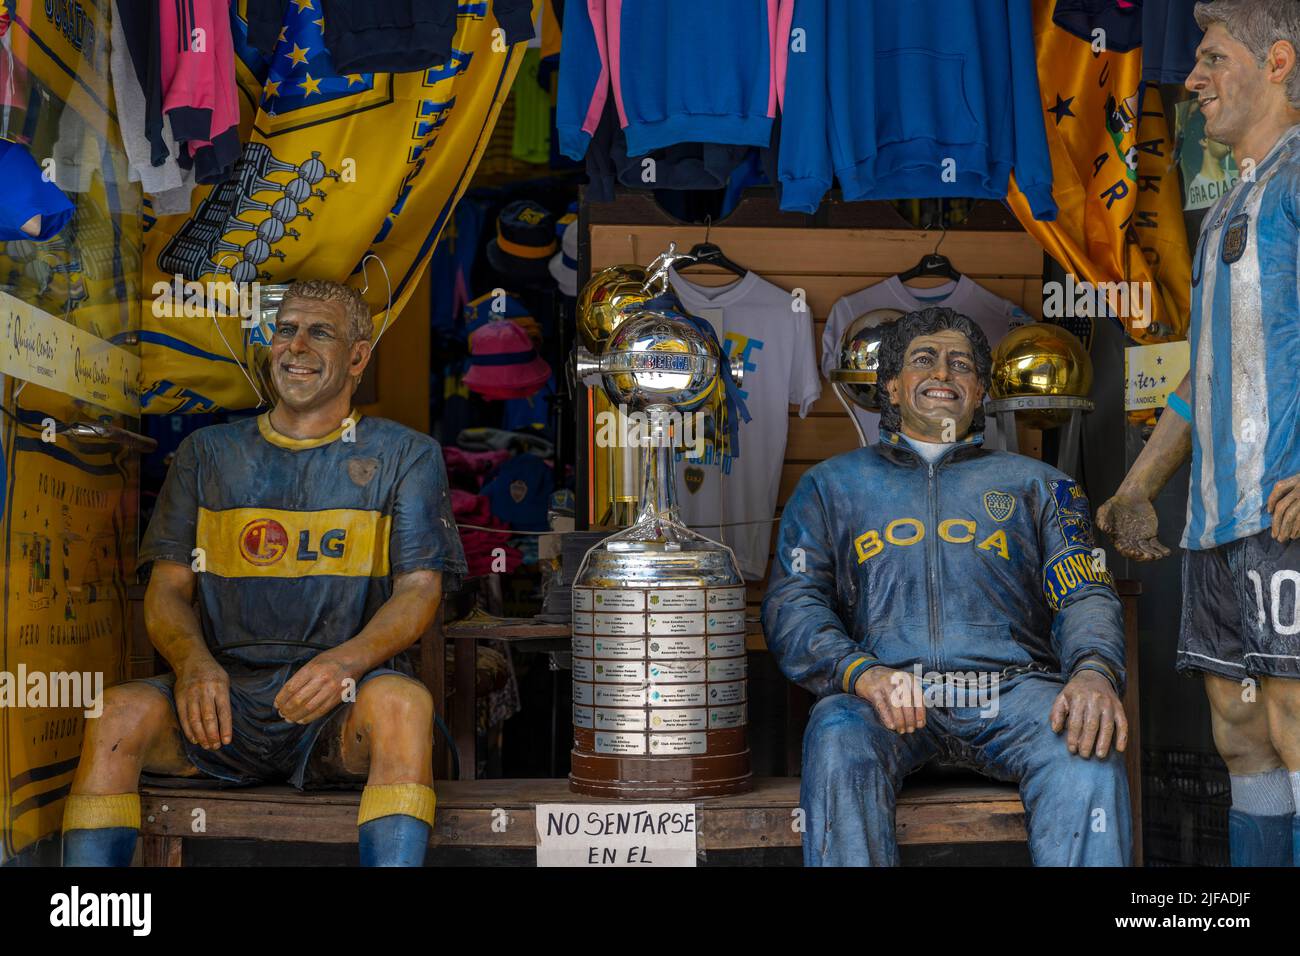 Football figures in a sports shop, Buenos Aires, Argentina Stock Photo